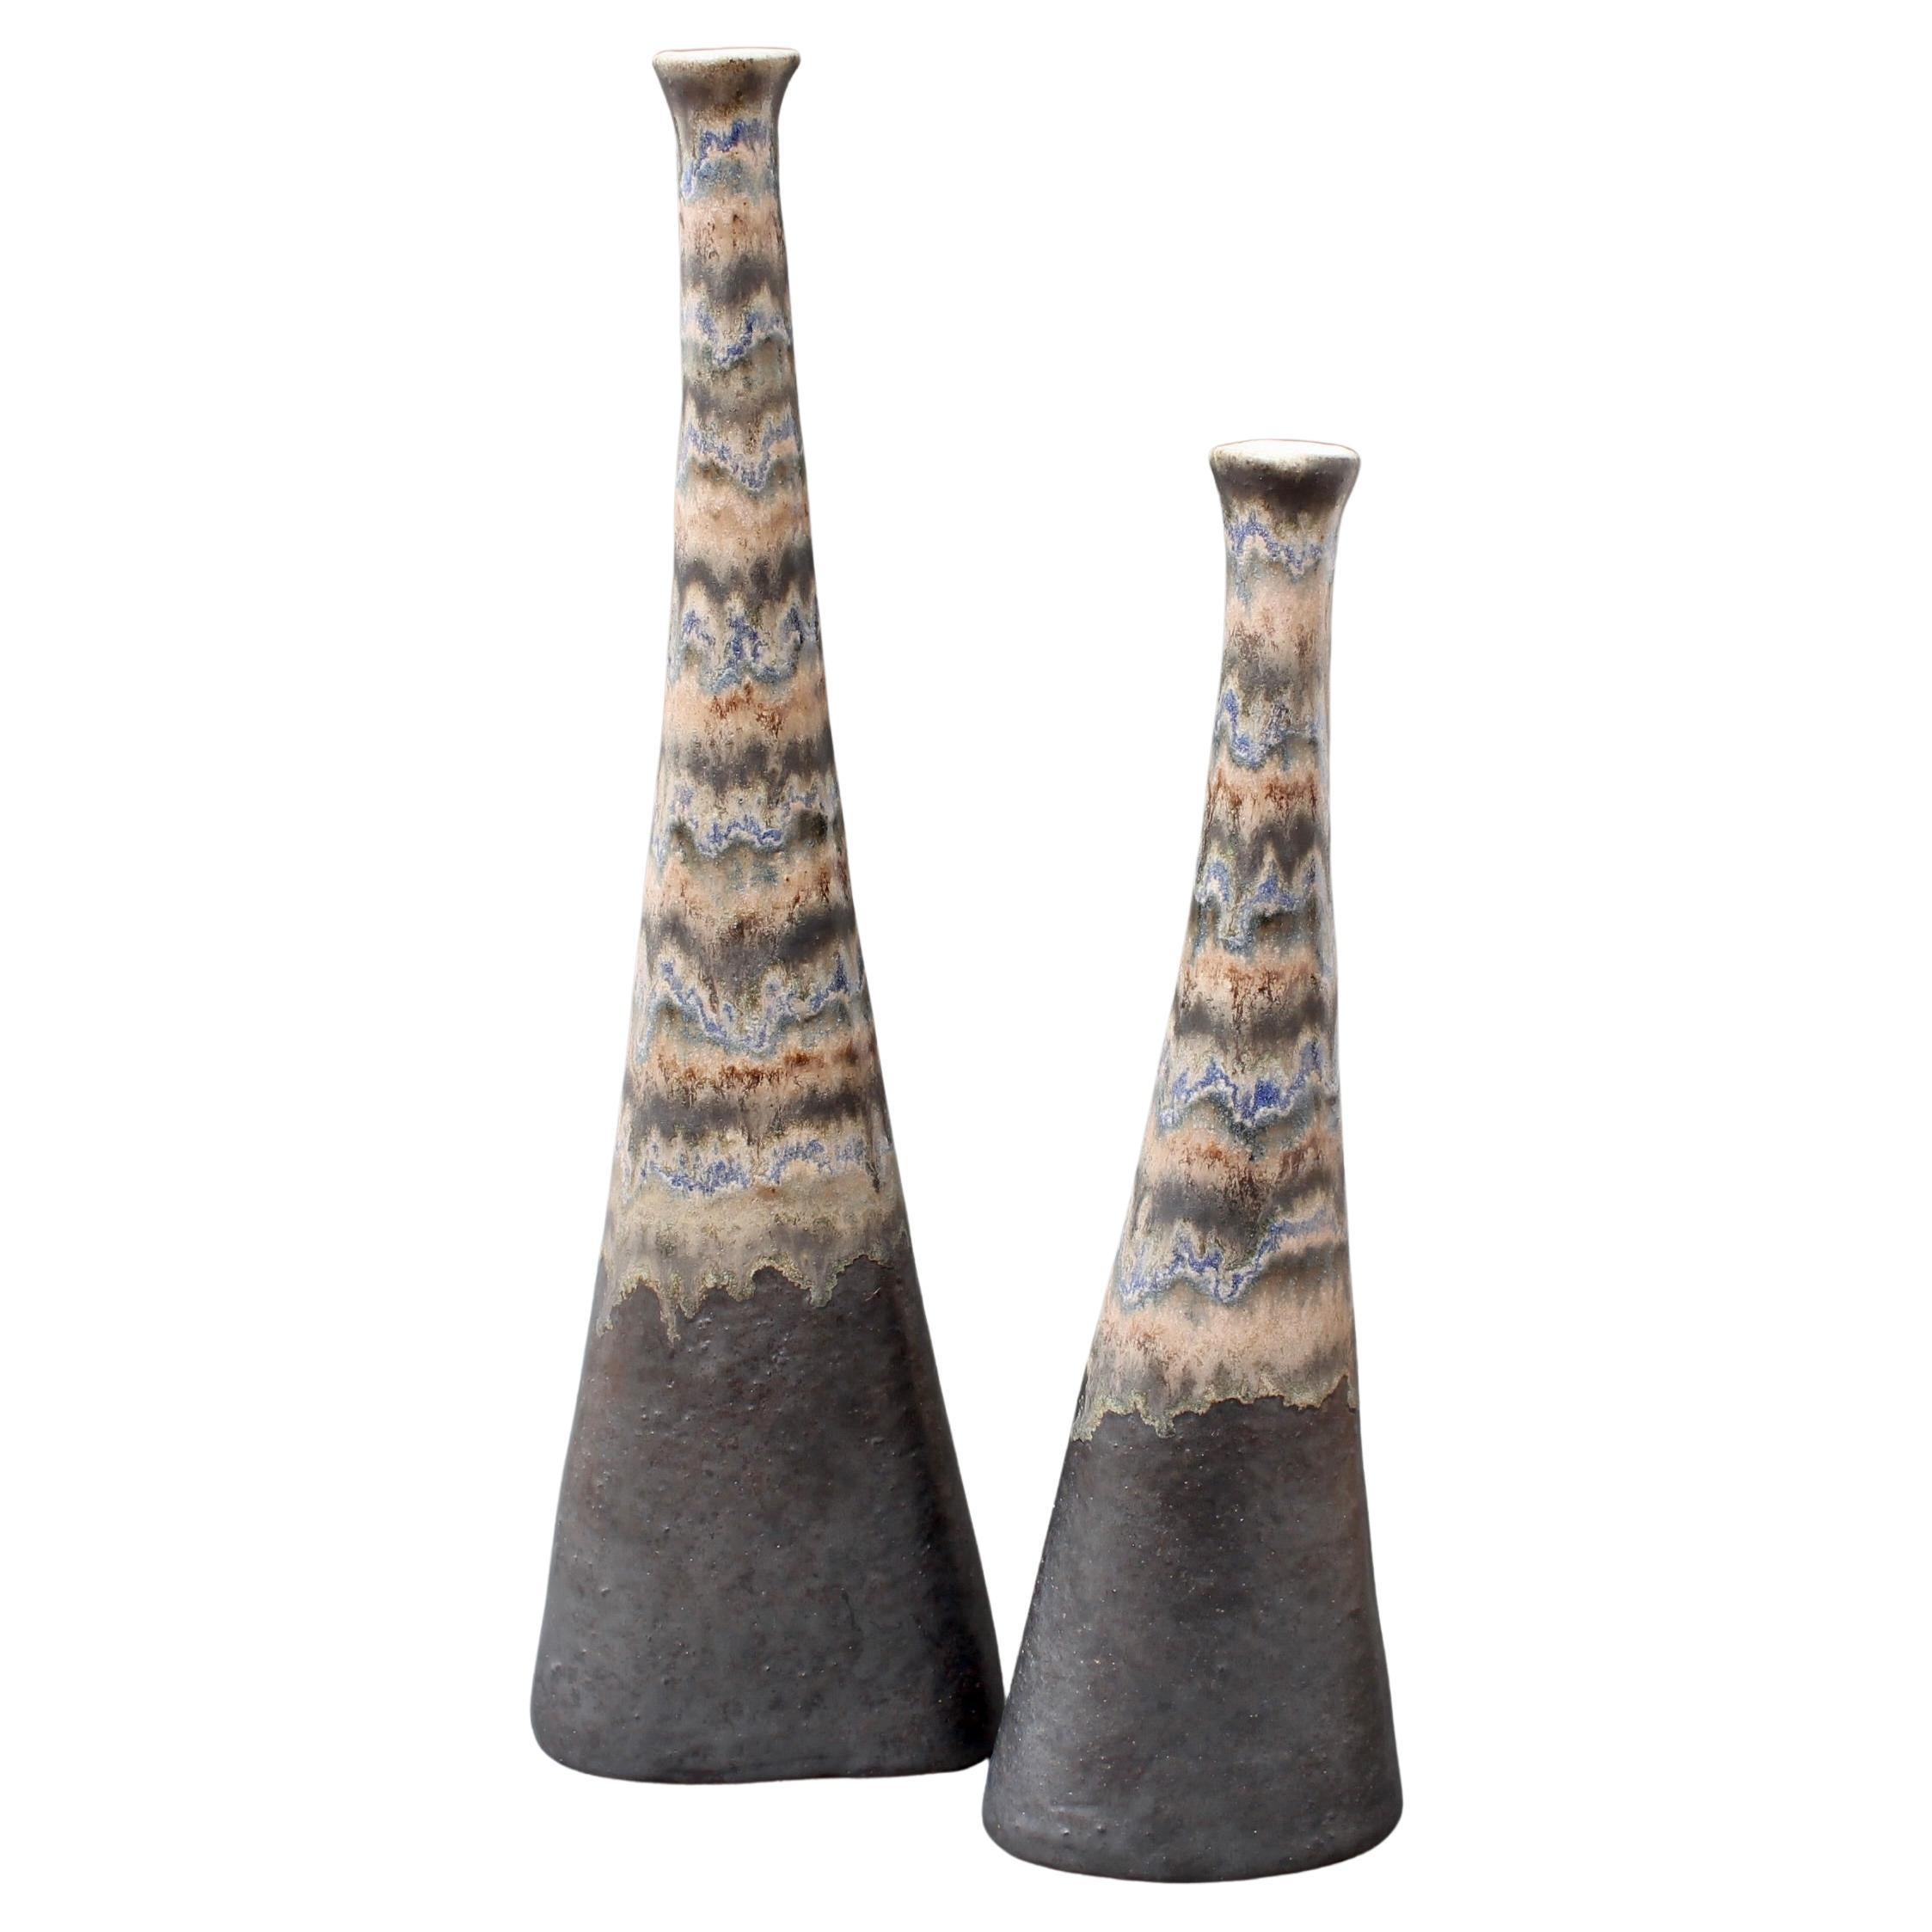 Set of two ceramic vases by Italian ceramicist Bruno Gambone, (circa 1980s). These very graceful, narrow-opening flower vases are works of art. They are visually stunning and tactile. The beautiful enamel finish is a dark brown mat at the base